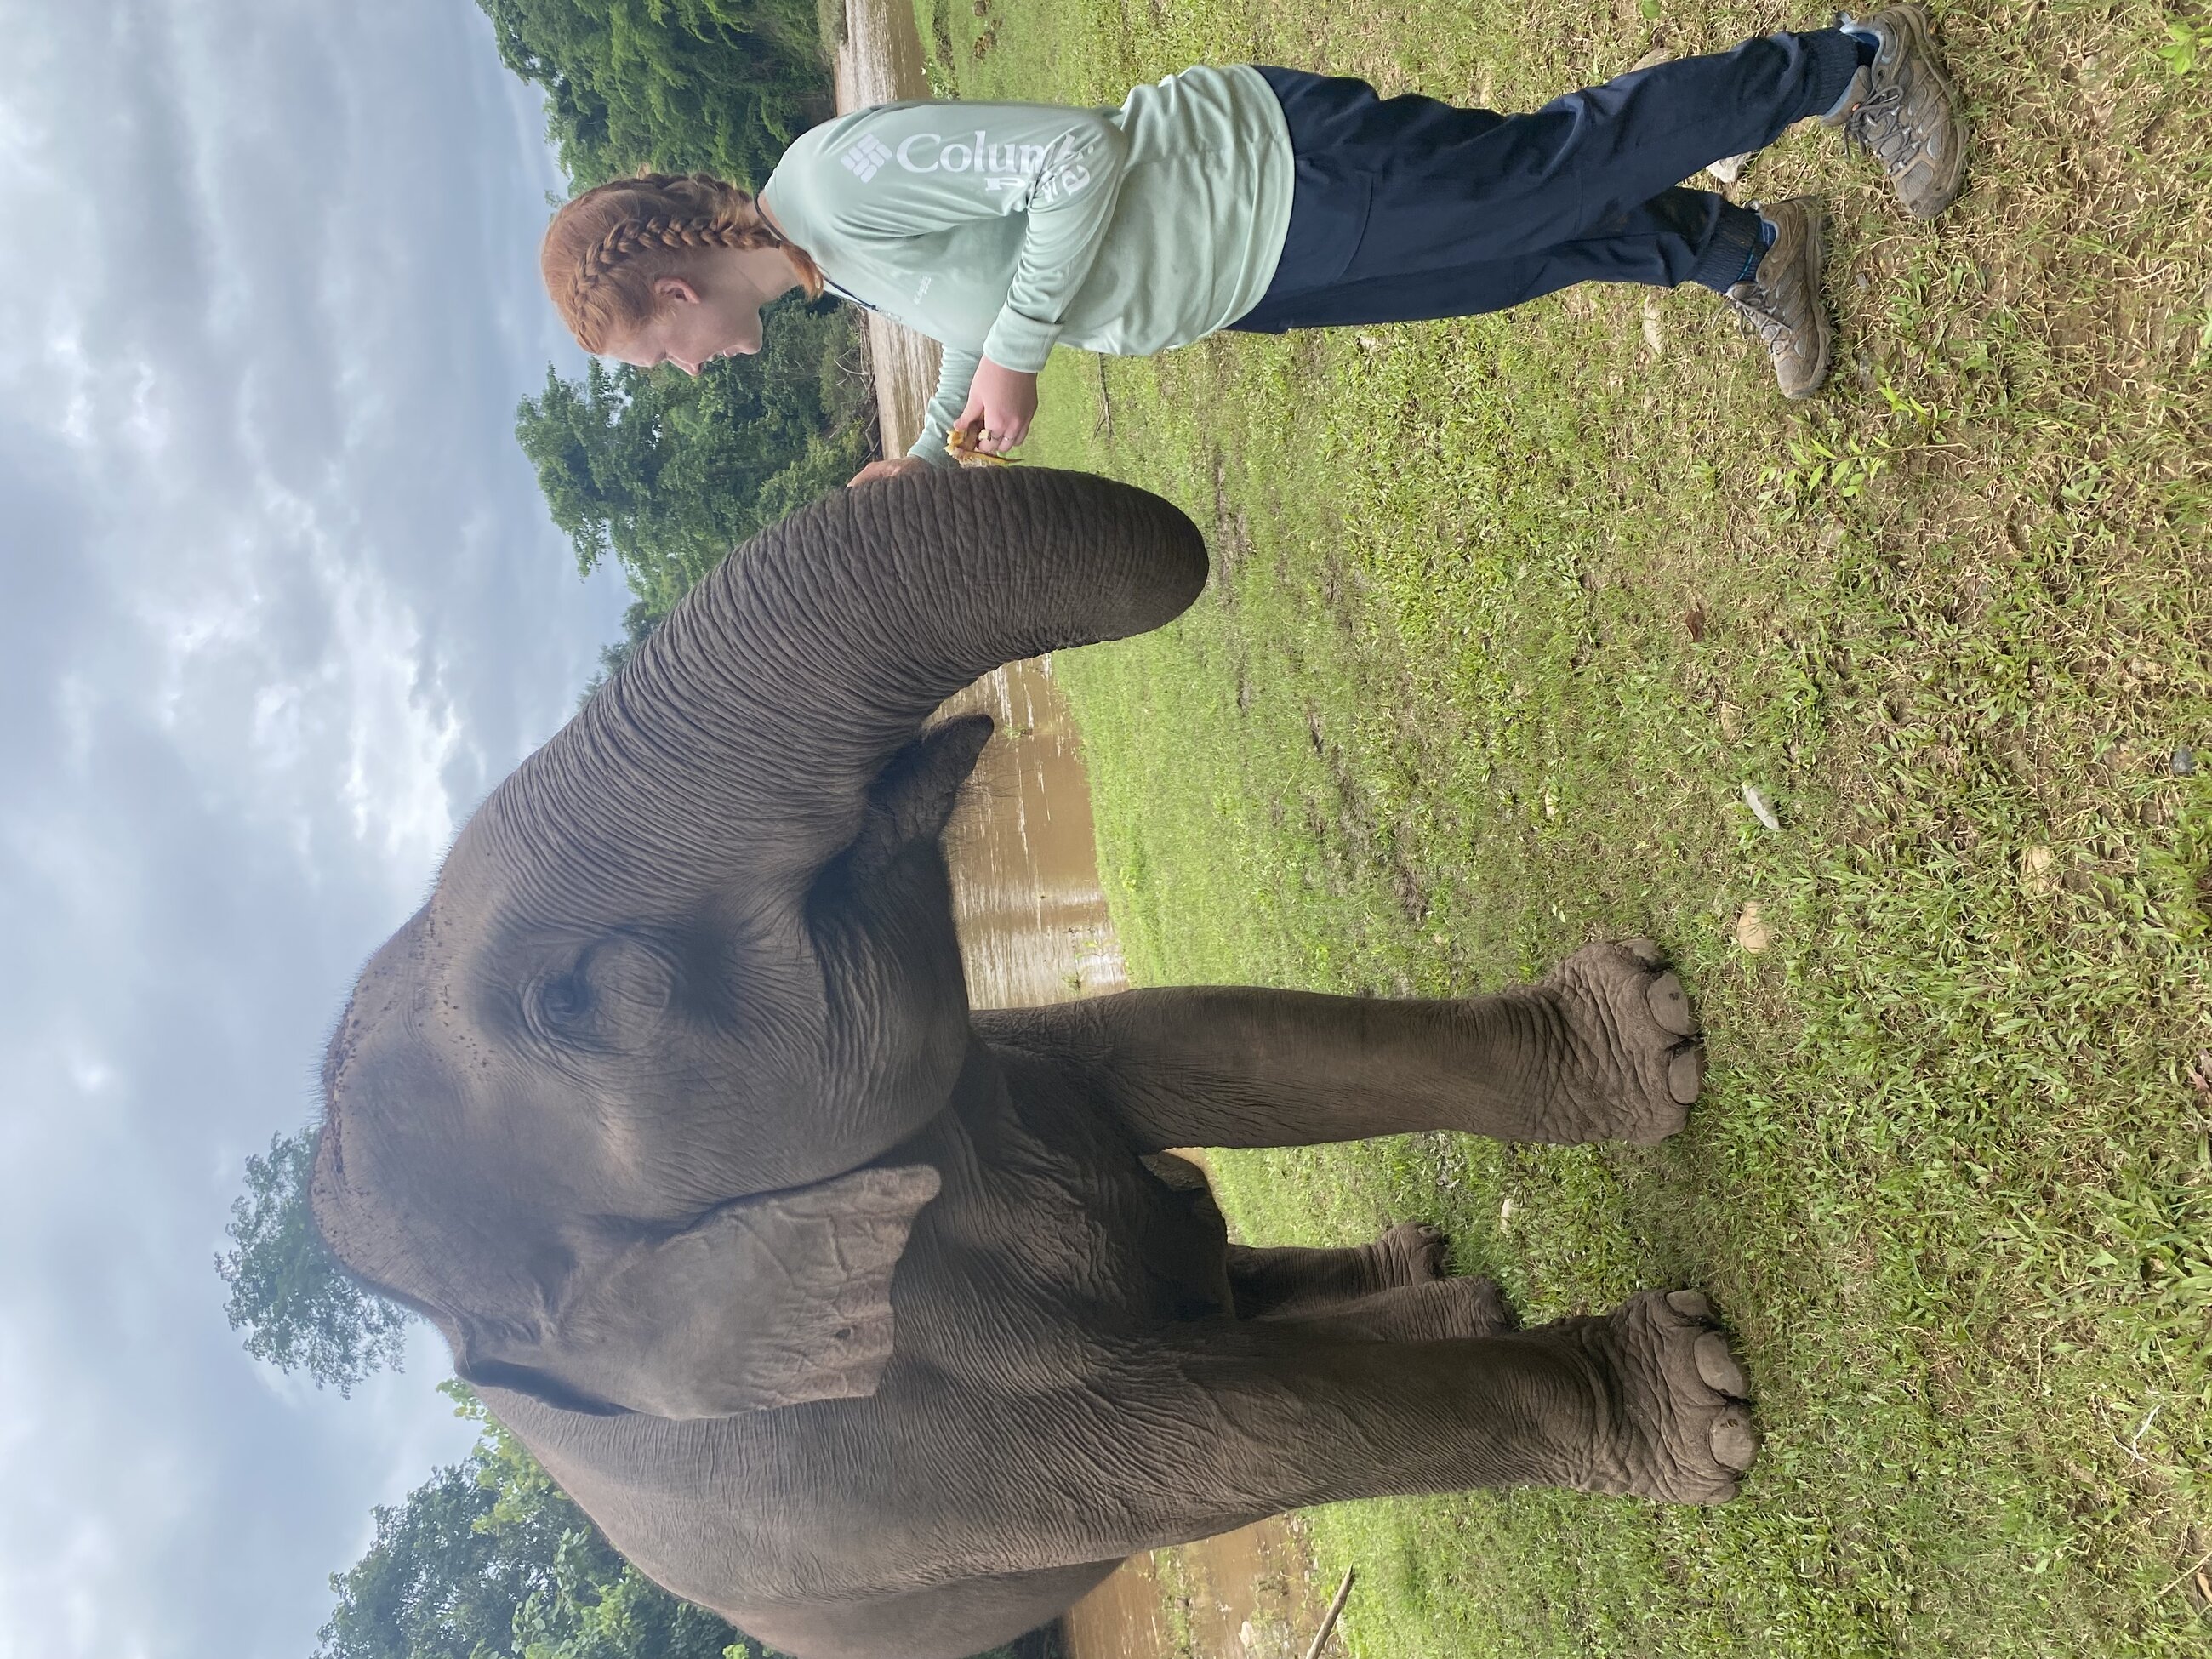 One of my favorite parts was spending time with elephants in the jungle!